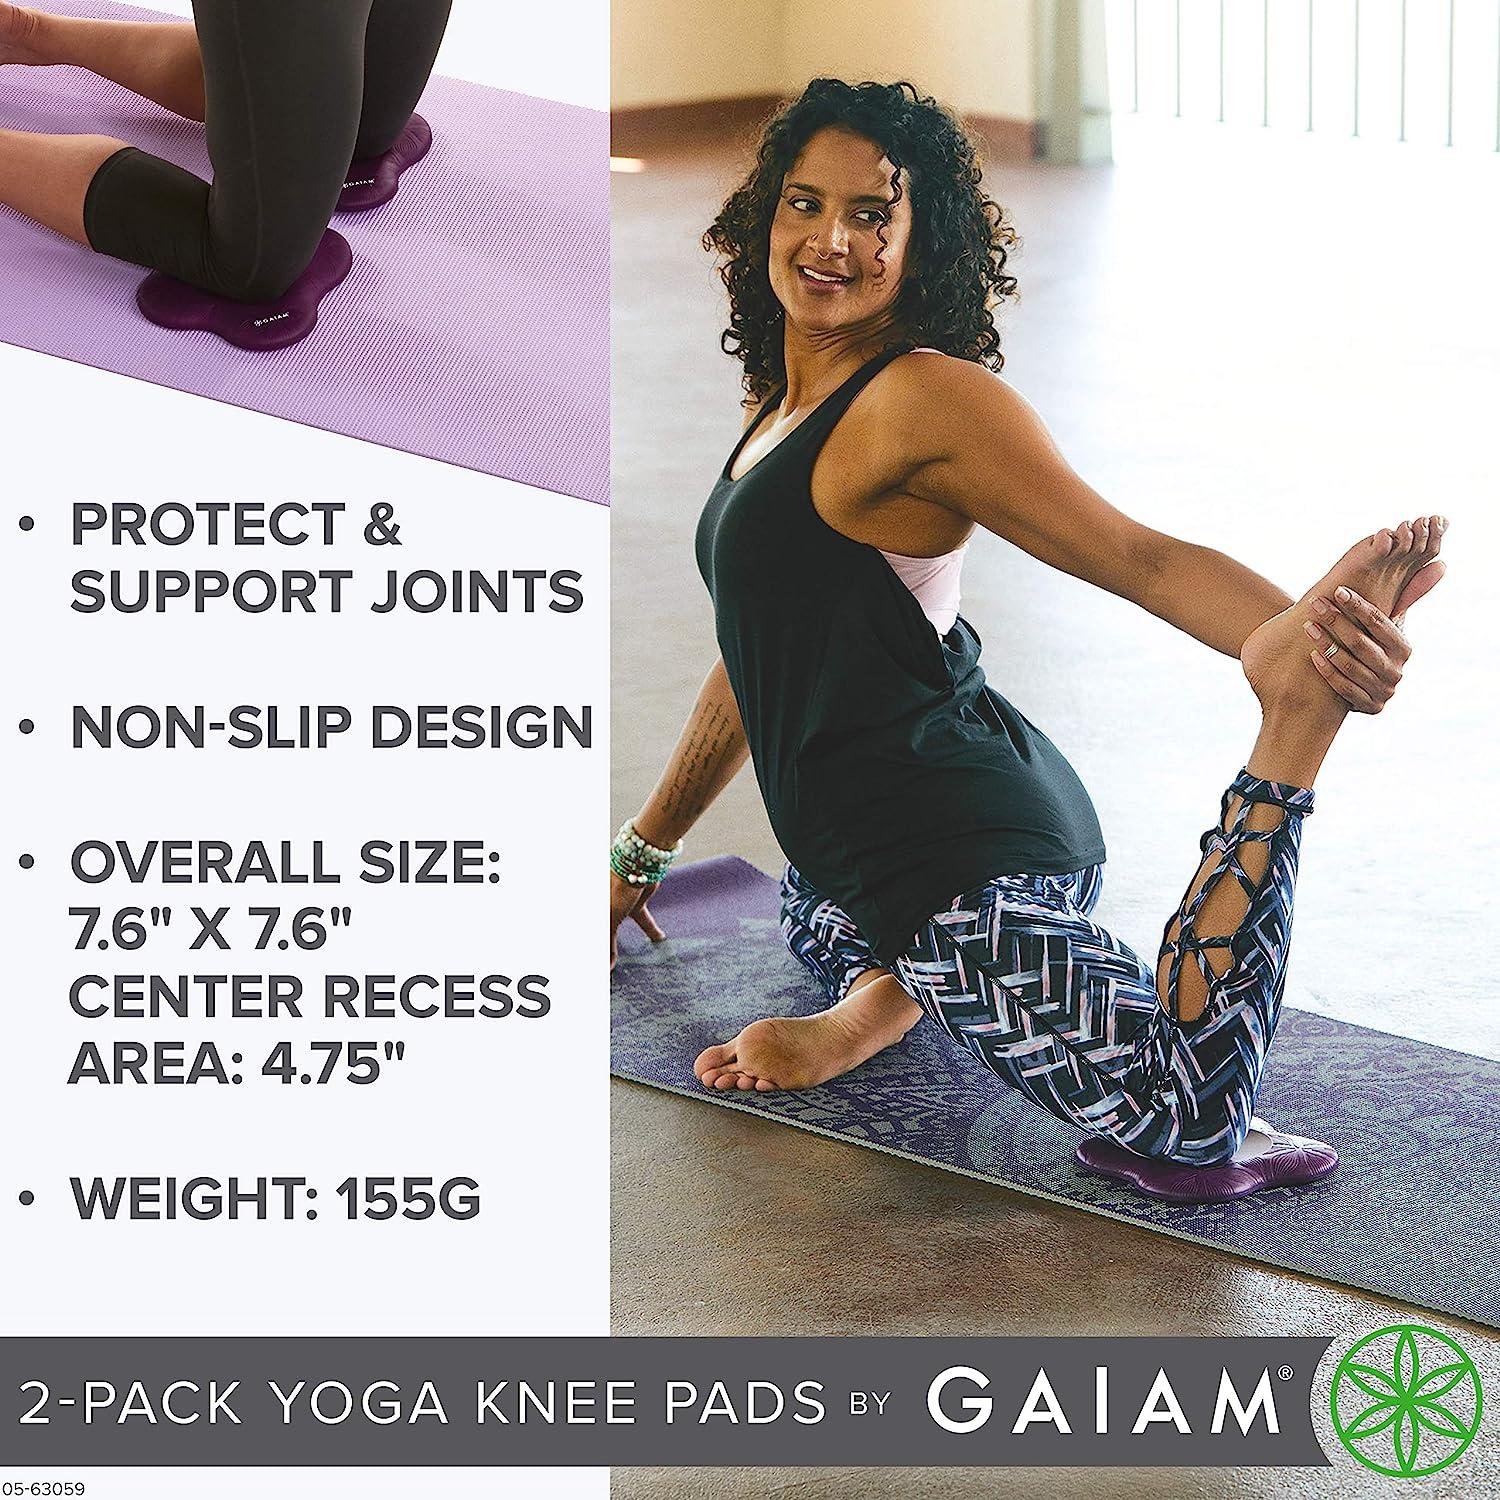 Gaiam Yoga Knee Pads (Set of 2) - Yoga Props and Accessories for